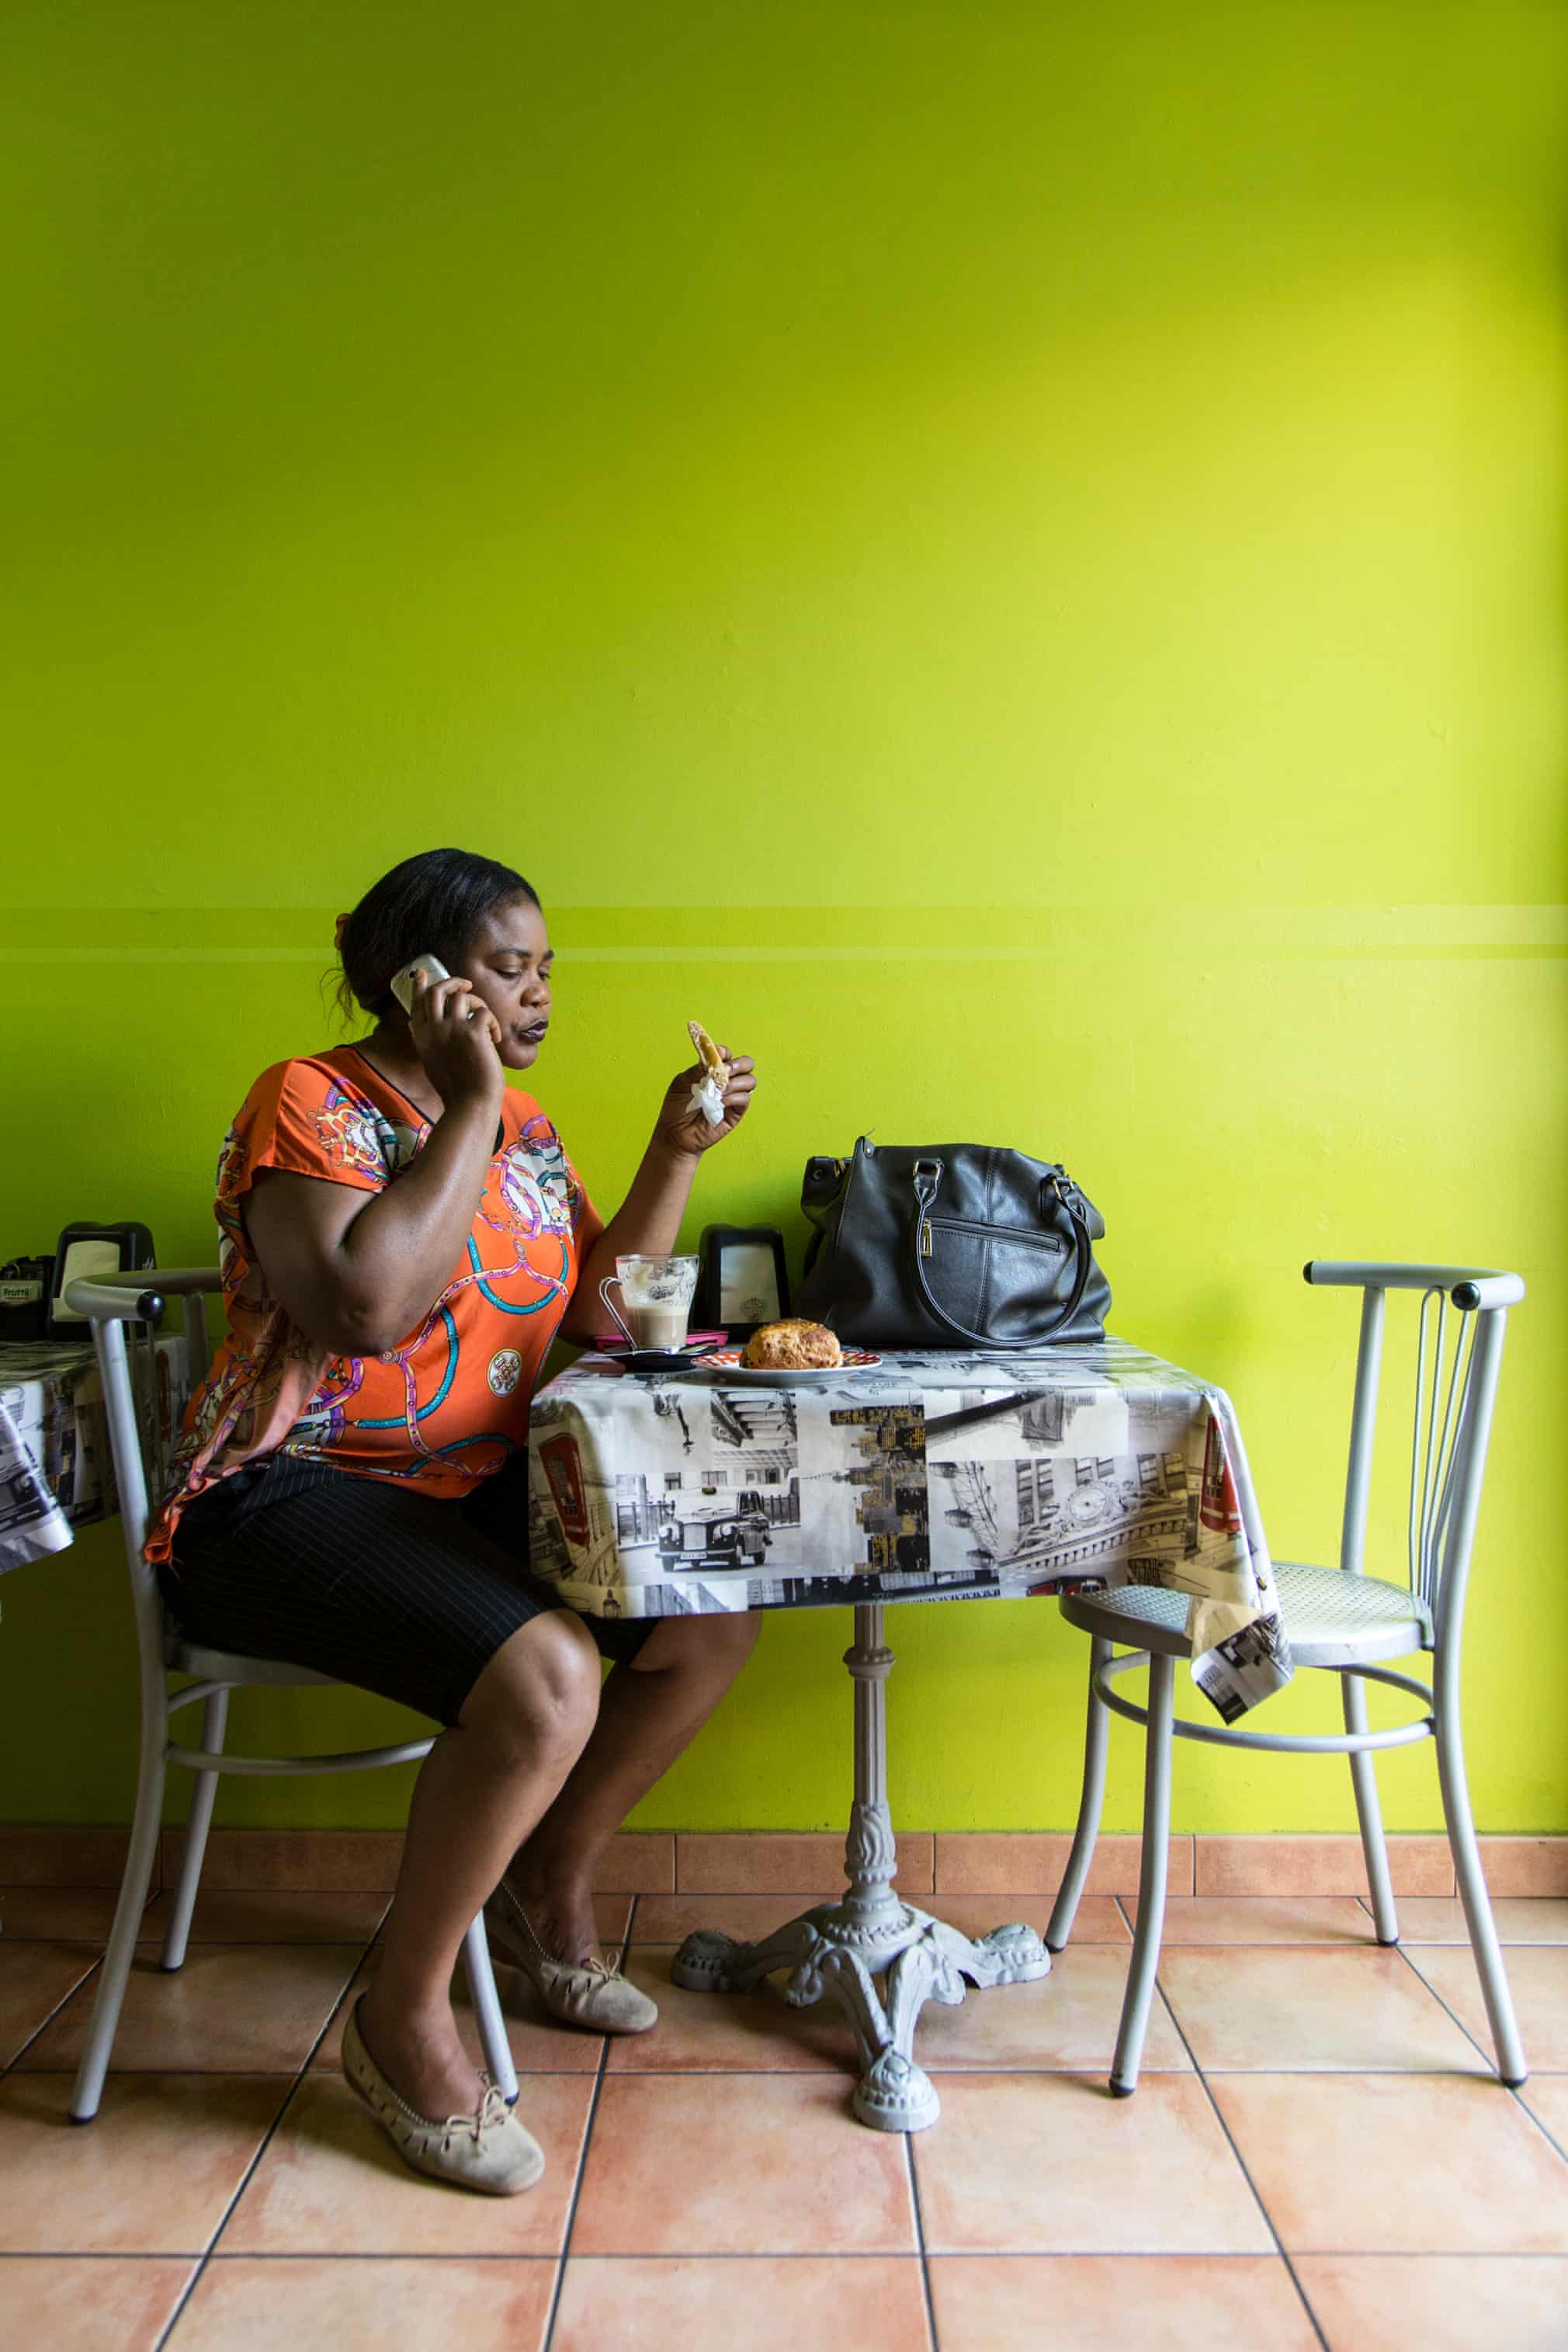 Princess Inyang Okokon, a former victim of sex trafficking, in a coffee shop in Asti, Italy.